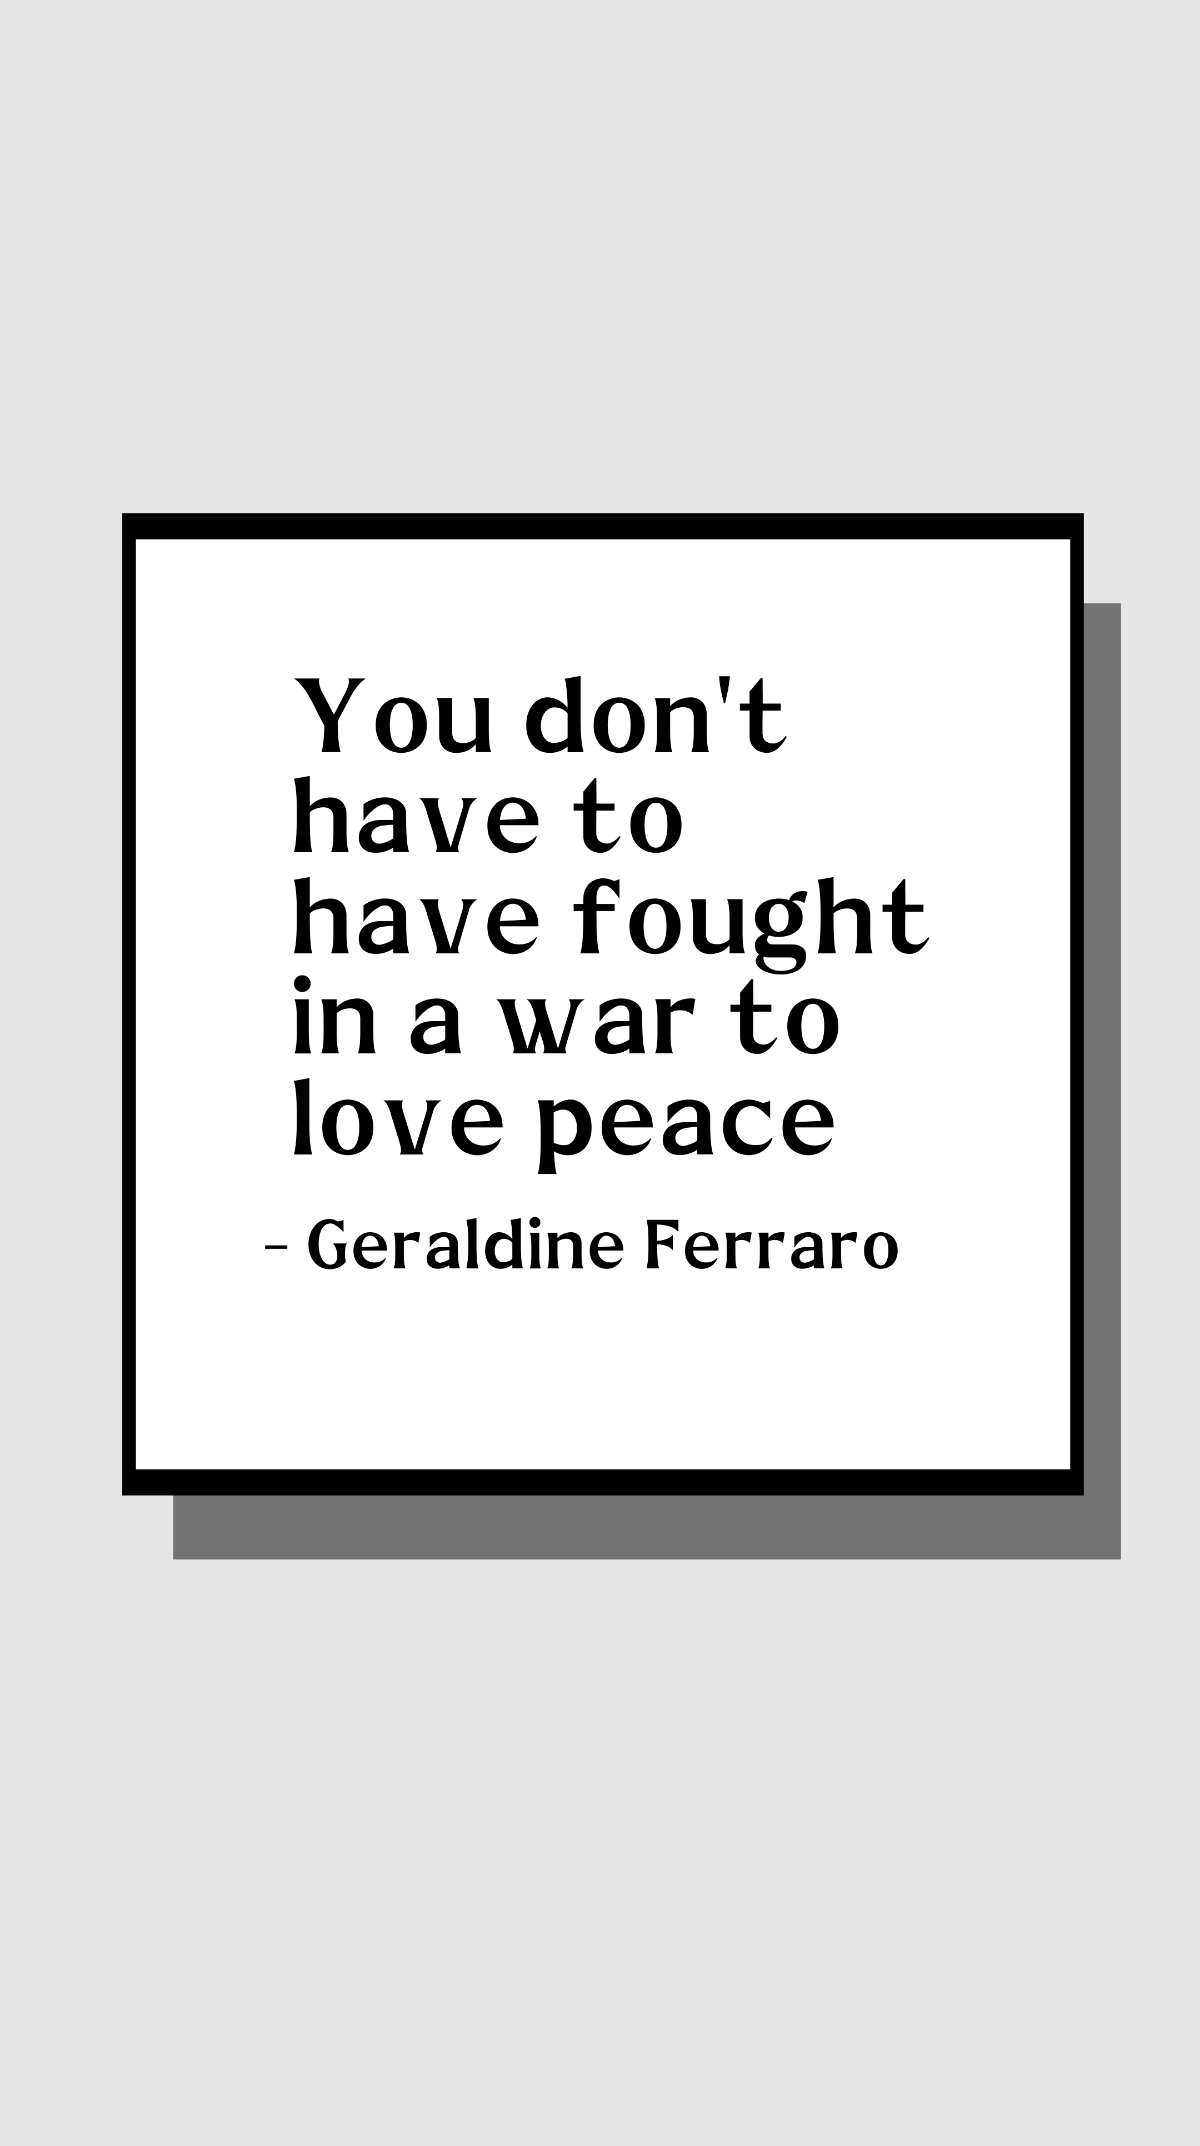 Geraldine Ferraro - You don't have to have fought in a war to love peace